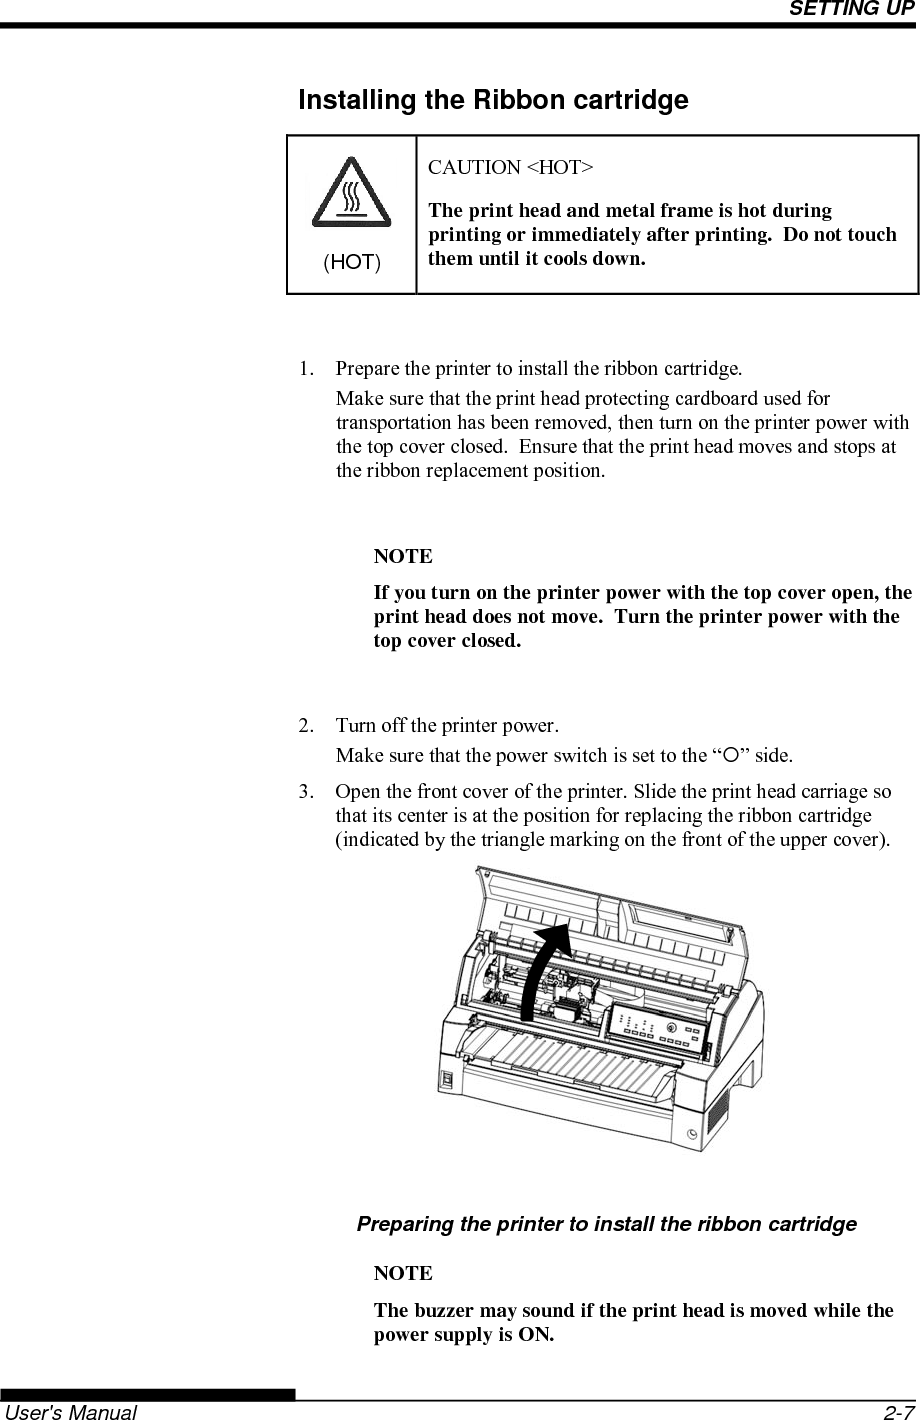 SETTING UP   User&apos;s Manual  2-7 Installing the Ribbon cartridge (HOT) CAUTION &lt;HOT&gt; The print head and metal frame is hot during printing or immediately after printing.  Do not touch them until it cools down.  1.  Prepare the printer to install the ribbon cartridge. Make sure that the print head protecting cardboard used for transportation has been removed, then turn on the printer power with the top cover closed.  Ensure that the print head moves and stops at the ribbon replacement position.  NOTE If you turn on the printer power with the top cover open, the print head does not move.  Turn the printer power with the top cover closed.  2.  Turn off the printer power. Make sure that the power switch is set to the “” side. 3.  Open the front cover of the printer. Slide the print head carriage so that its center is at the position for replacing the ribbon cartridge (indicated by the triangle marking on the front of the upper cover).         Preparing the printer to install the ribbon cartridge NOTE The buzzer may sound if the print head is moved while the power supply is ON. 